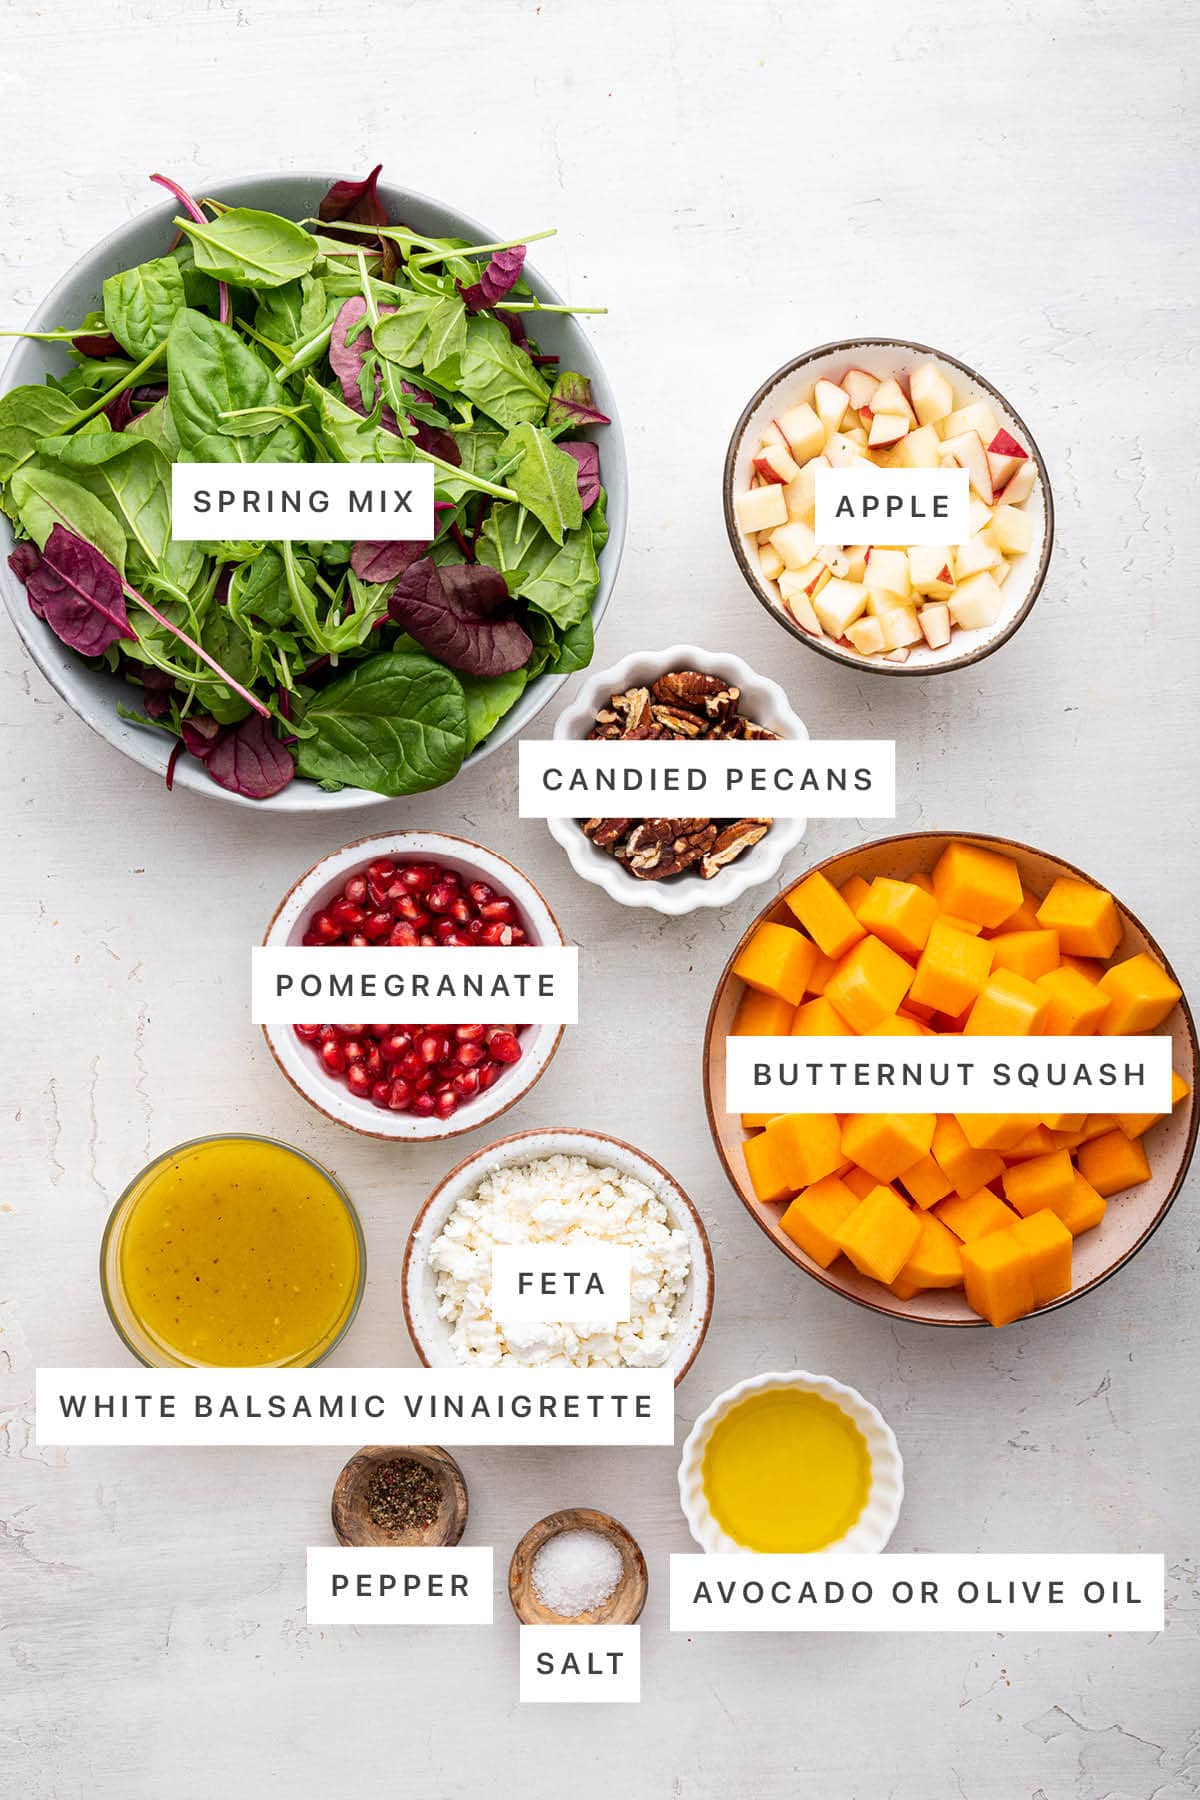 Ingredients measured out to make a Winter Salad: spring mix, candied pecans, apple, pomegranate, butternut squash, white balsamic vinaigrette, feta, pepper, salt and olive oil.